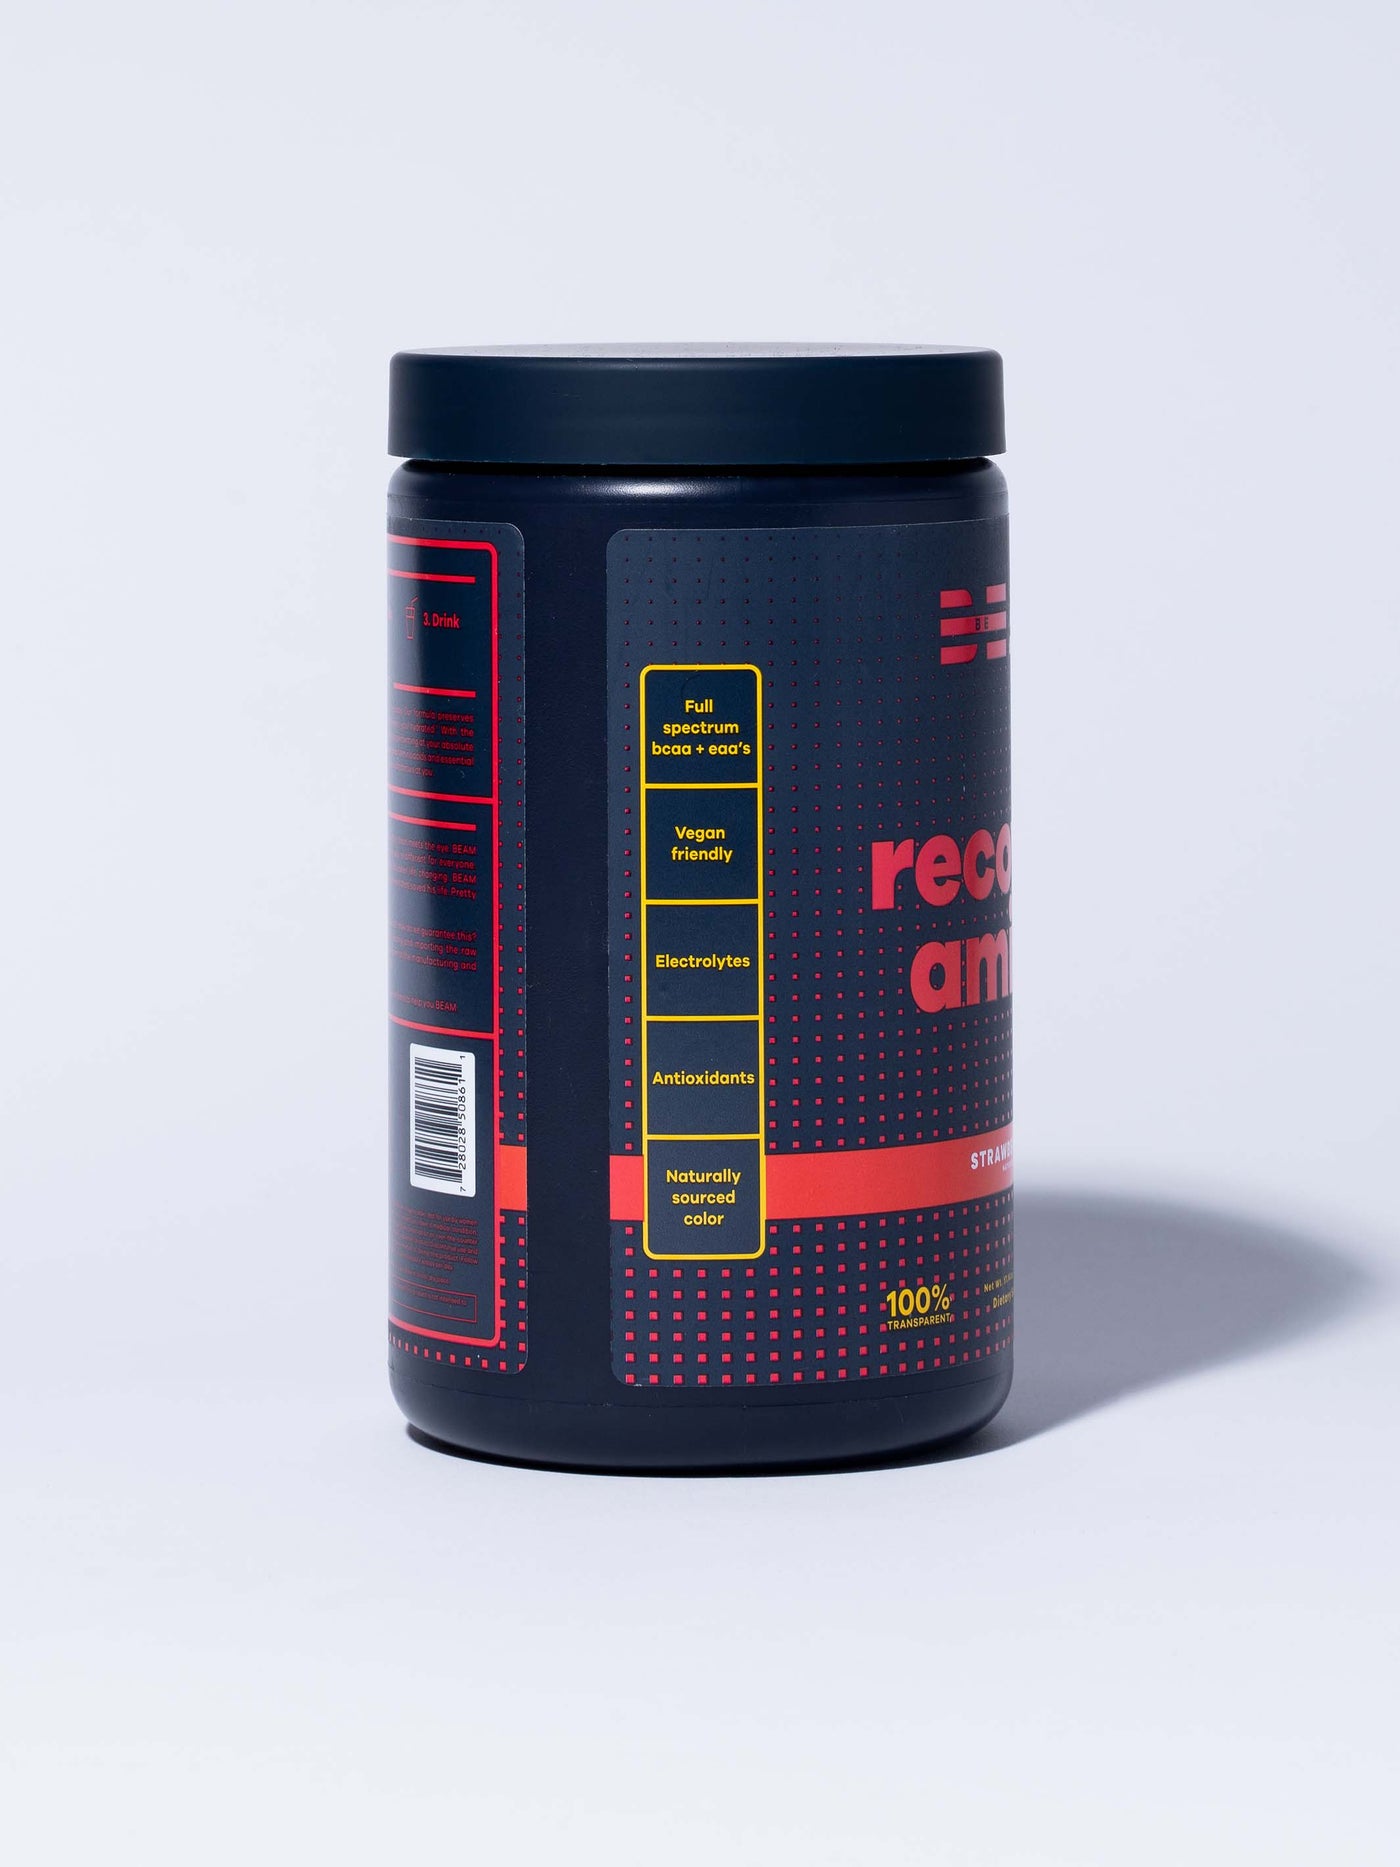 Order our pre-workout samples today and receive a Bonus shaker